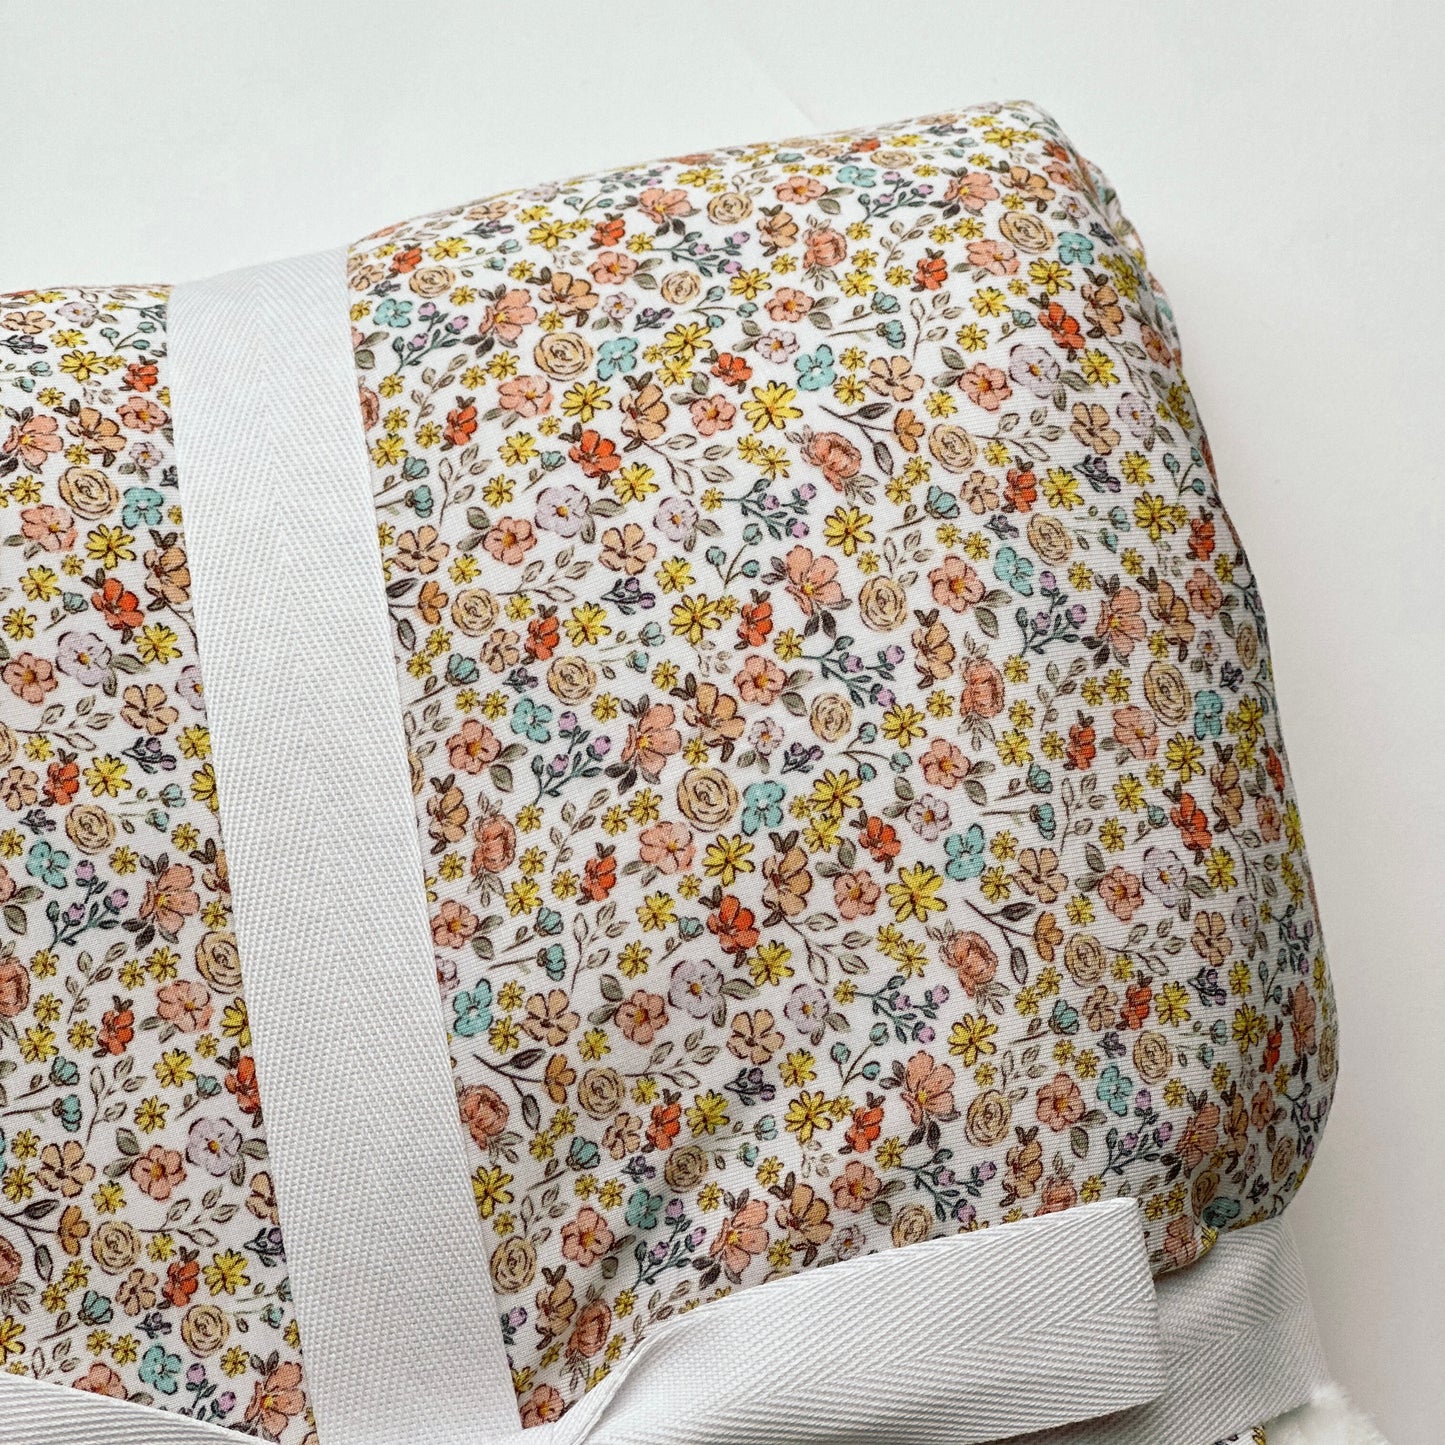 Bamboo/plush blanket - BRIGHT Antique Floral